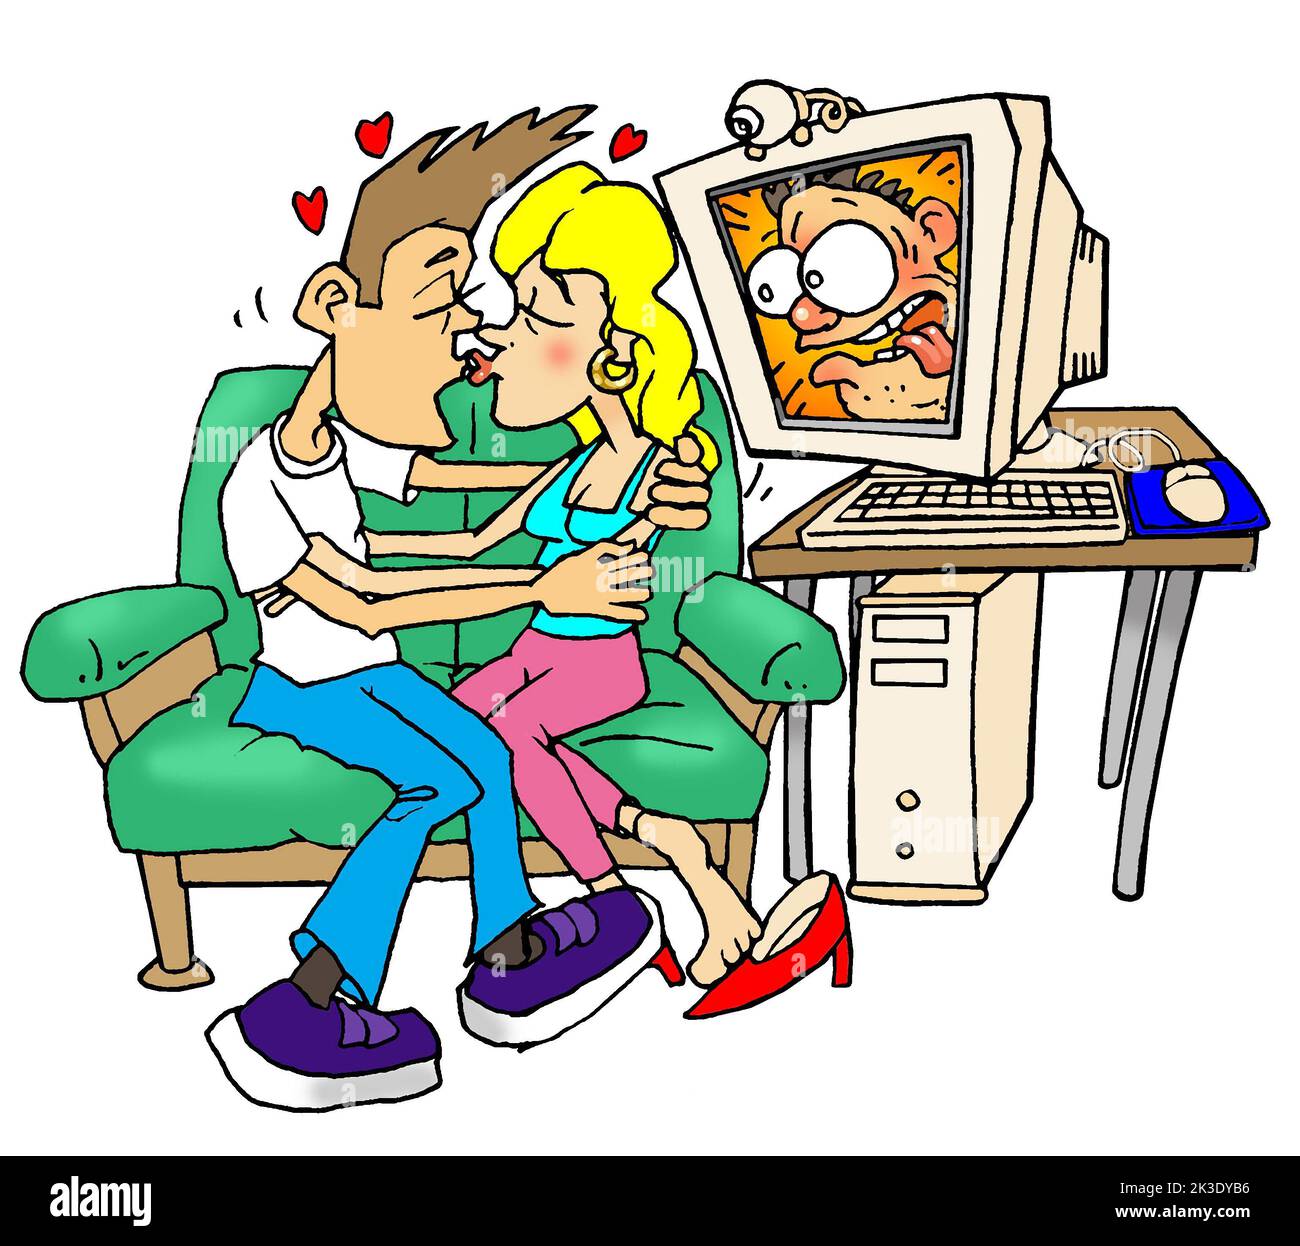 Cartoon art illustrating concept of webcams being prone to hacking, which can lead to privacy breaches where cameras/speakers are controlled by others Stock Photo